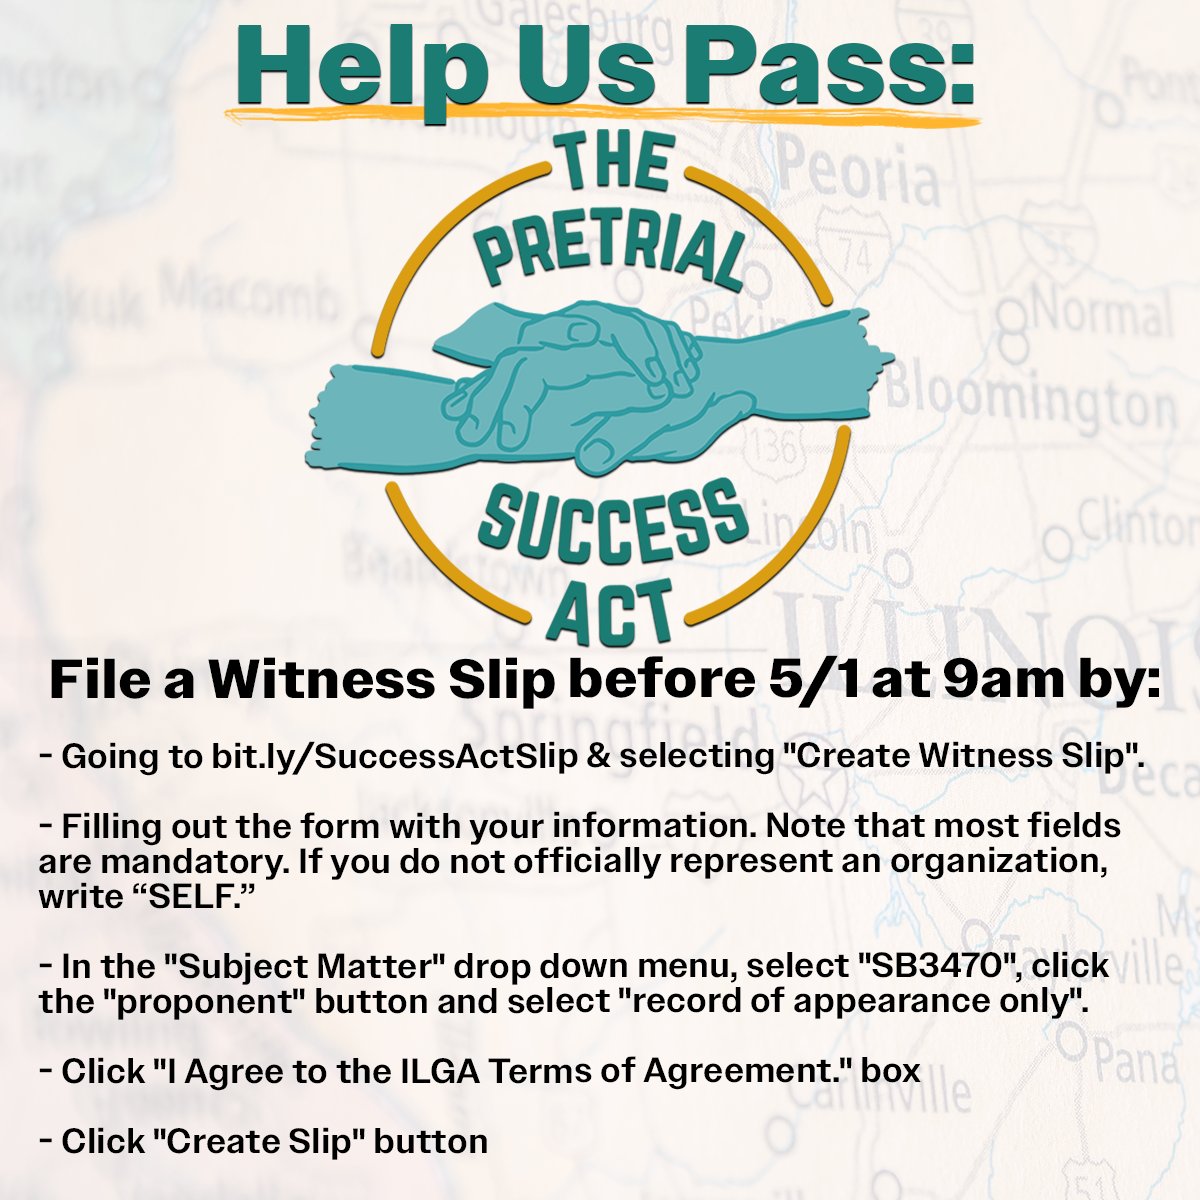 🚨ACTION ALERT🚨 Improving community safety starts with investment. Let's increase access to case management, mental healthcare, and substance use treatment for people awaiting trial. File a witness slip in support of the Pretrial Success Act: bit.ly/SuccessActSlip